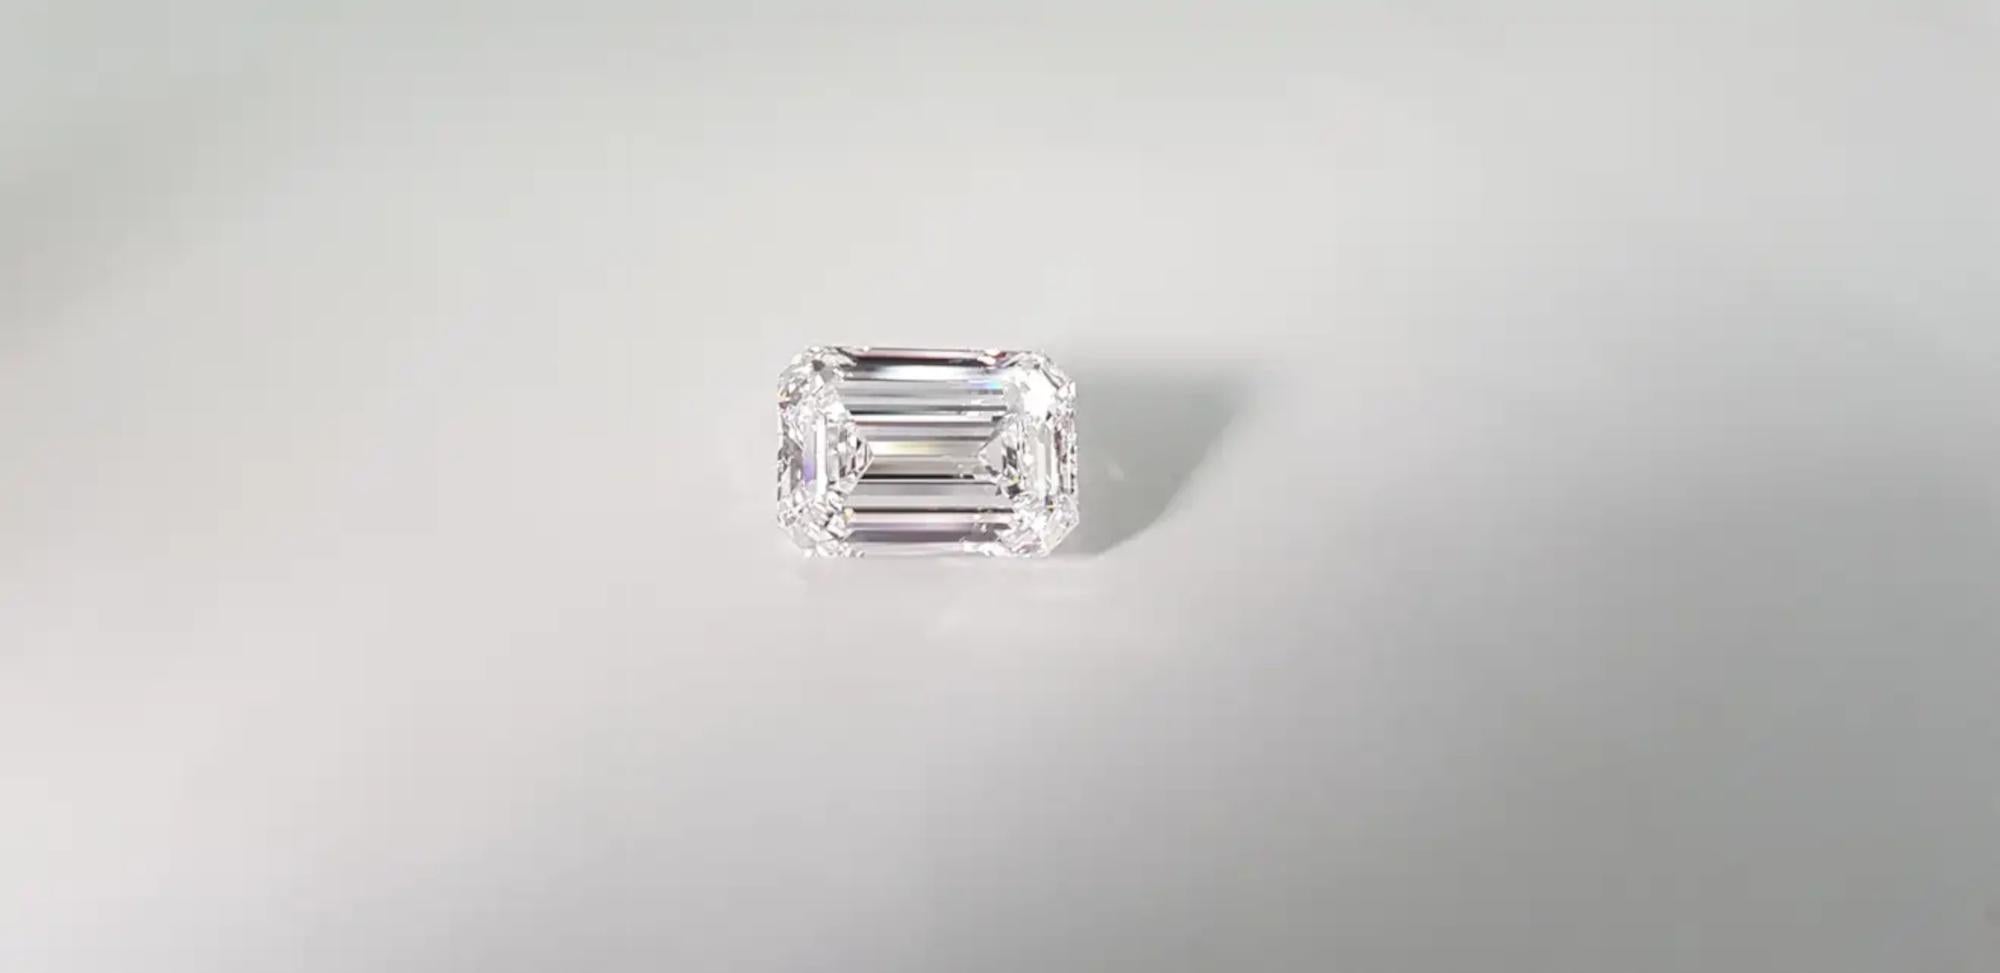 This ring is an exquisite piece of jewelry crafted in polished 18K yellow gold, offering a warm and rich foundation for the design. At the center of the ring sits a commanding 4.01-carat emerald-cut diamond. This central stone, certified by the GIA